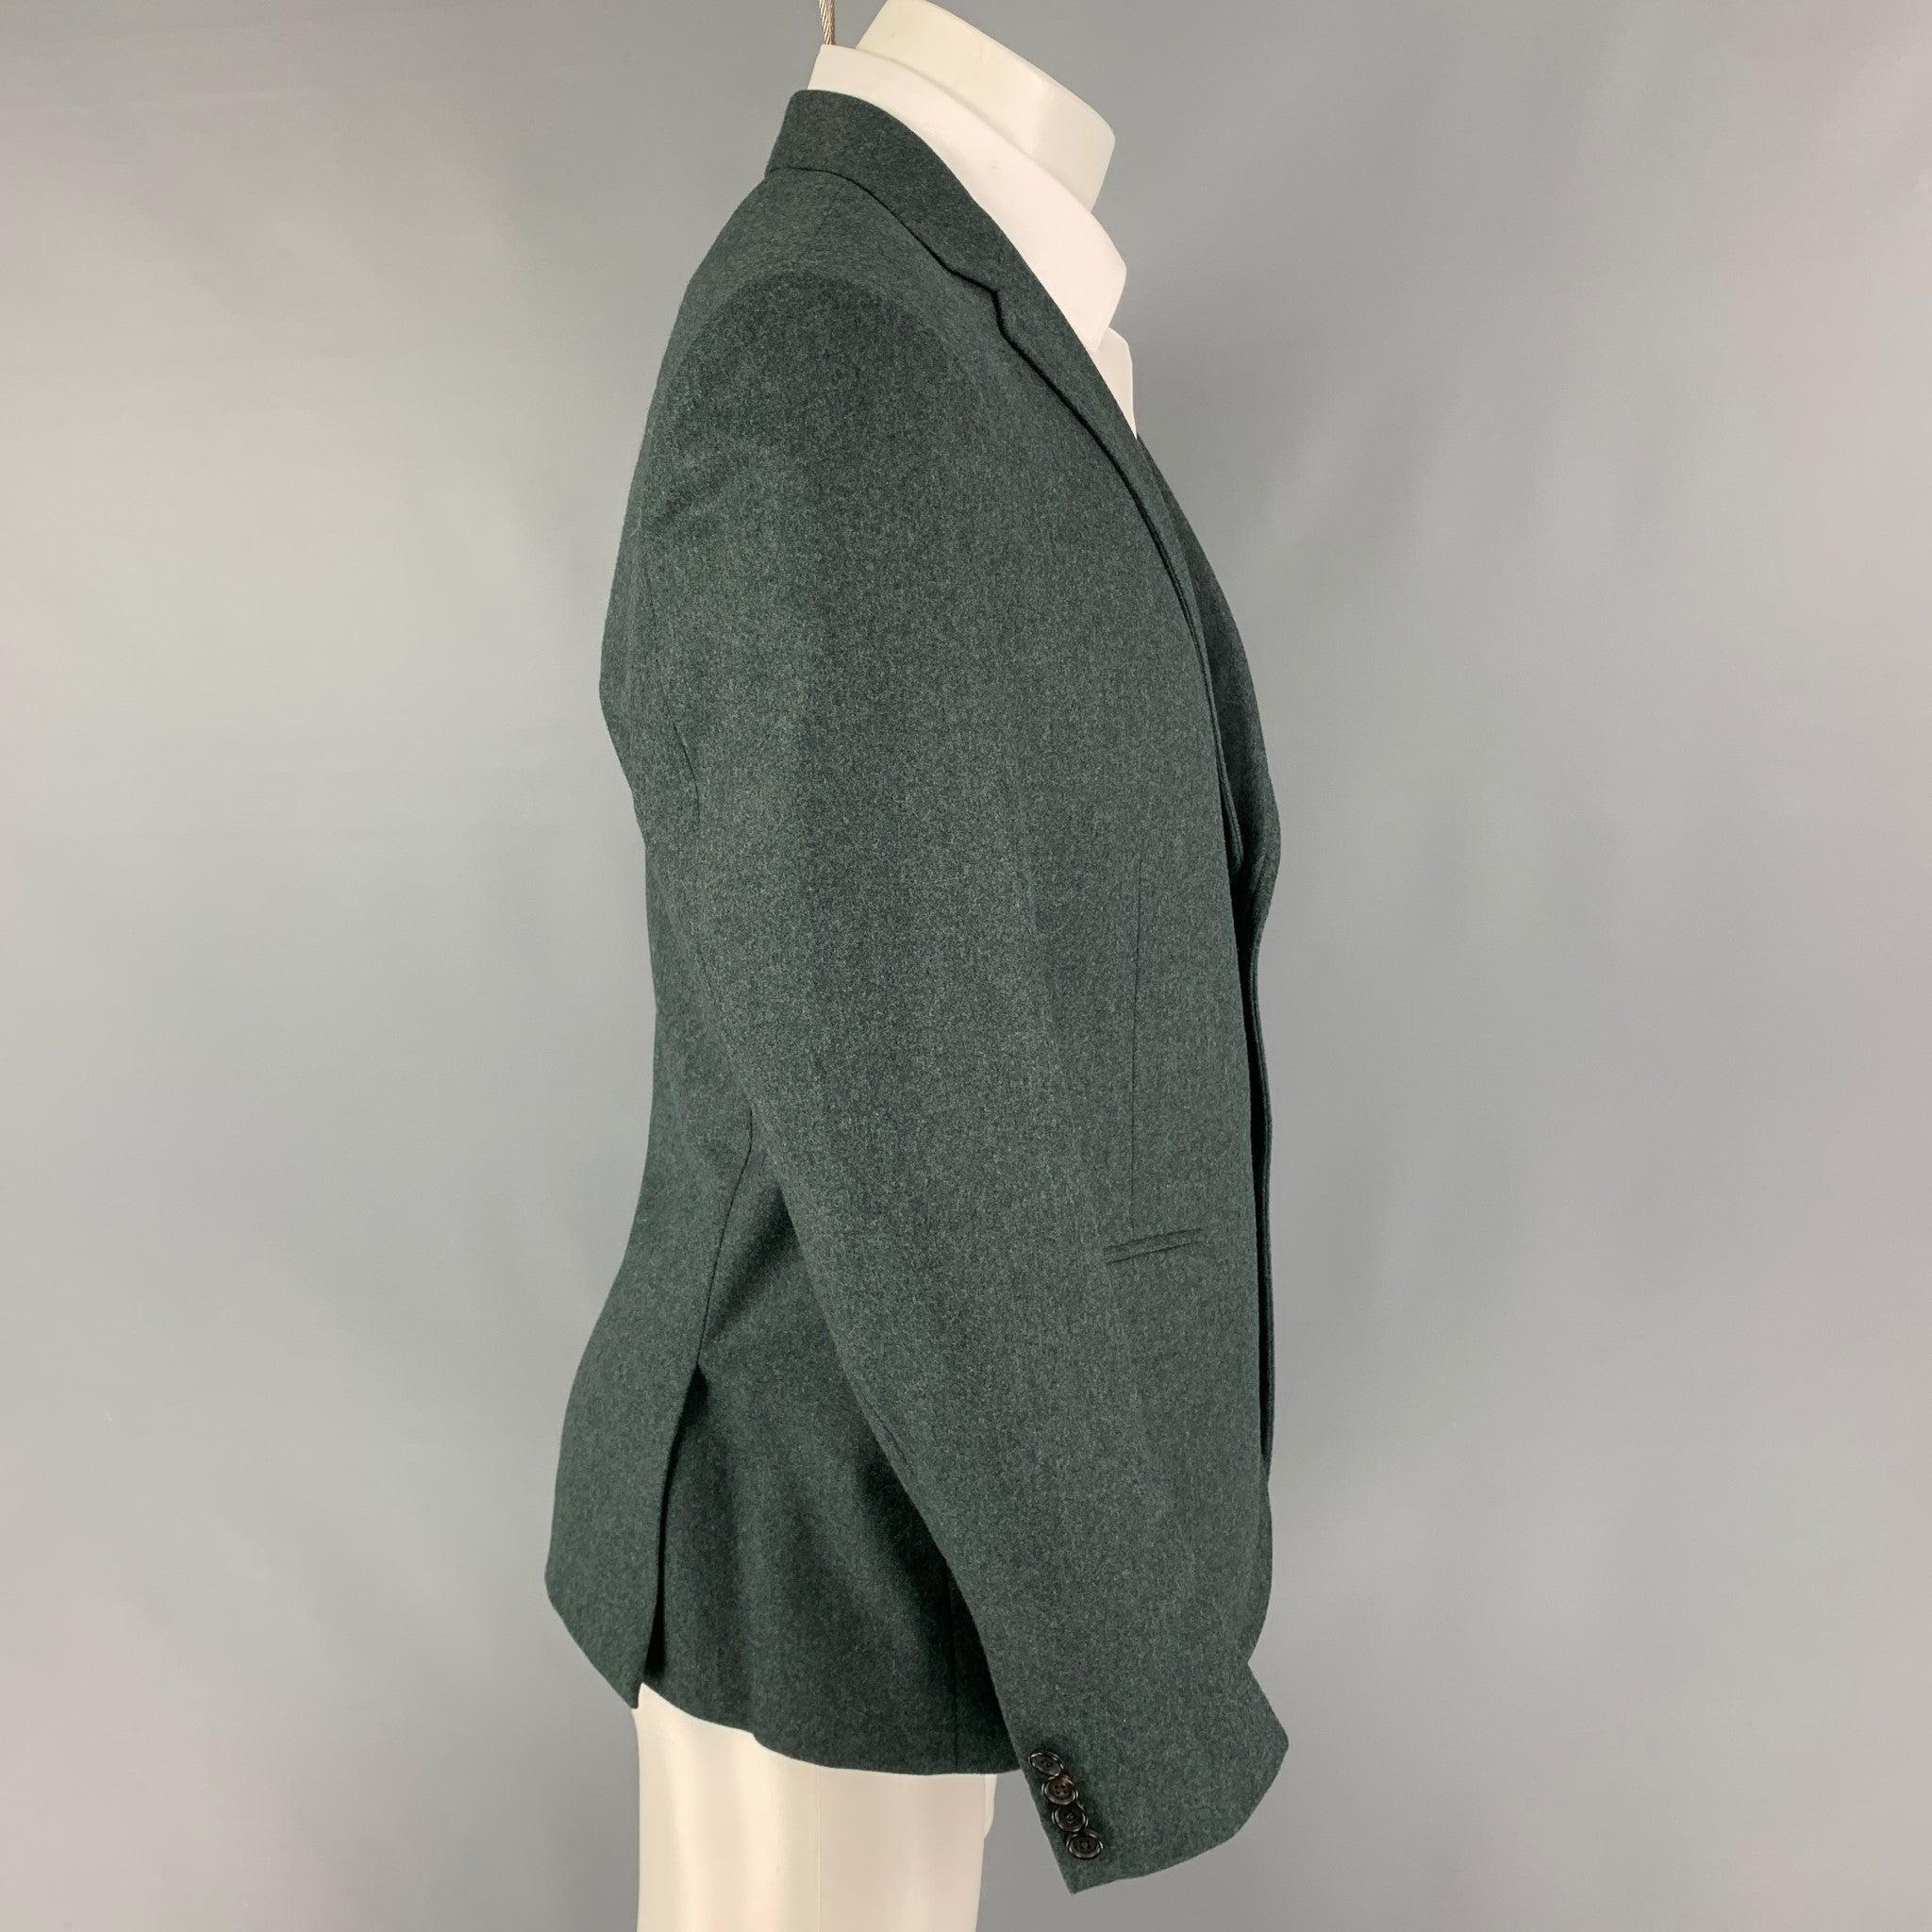 BAND OF OUTSIDERS sport coat comes in a green wool with a full liner featuring a notch lapel, flap pockets, double back vent, and a double button closure.
Very Good
Pre-Owned Condition. 

Marked:   4 

Measurements: 
 
Shoulder: 18 inches Chest: 40